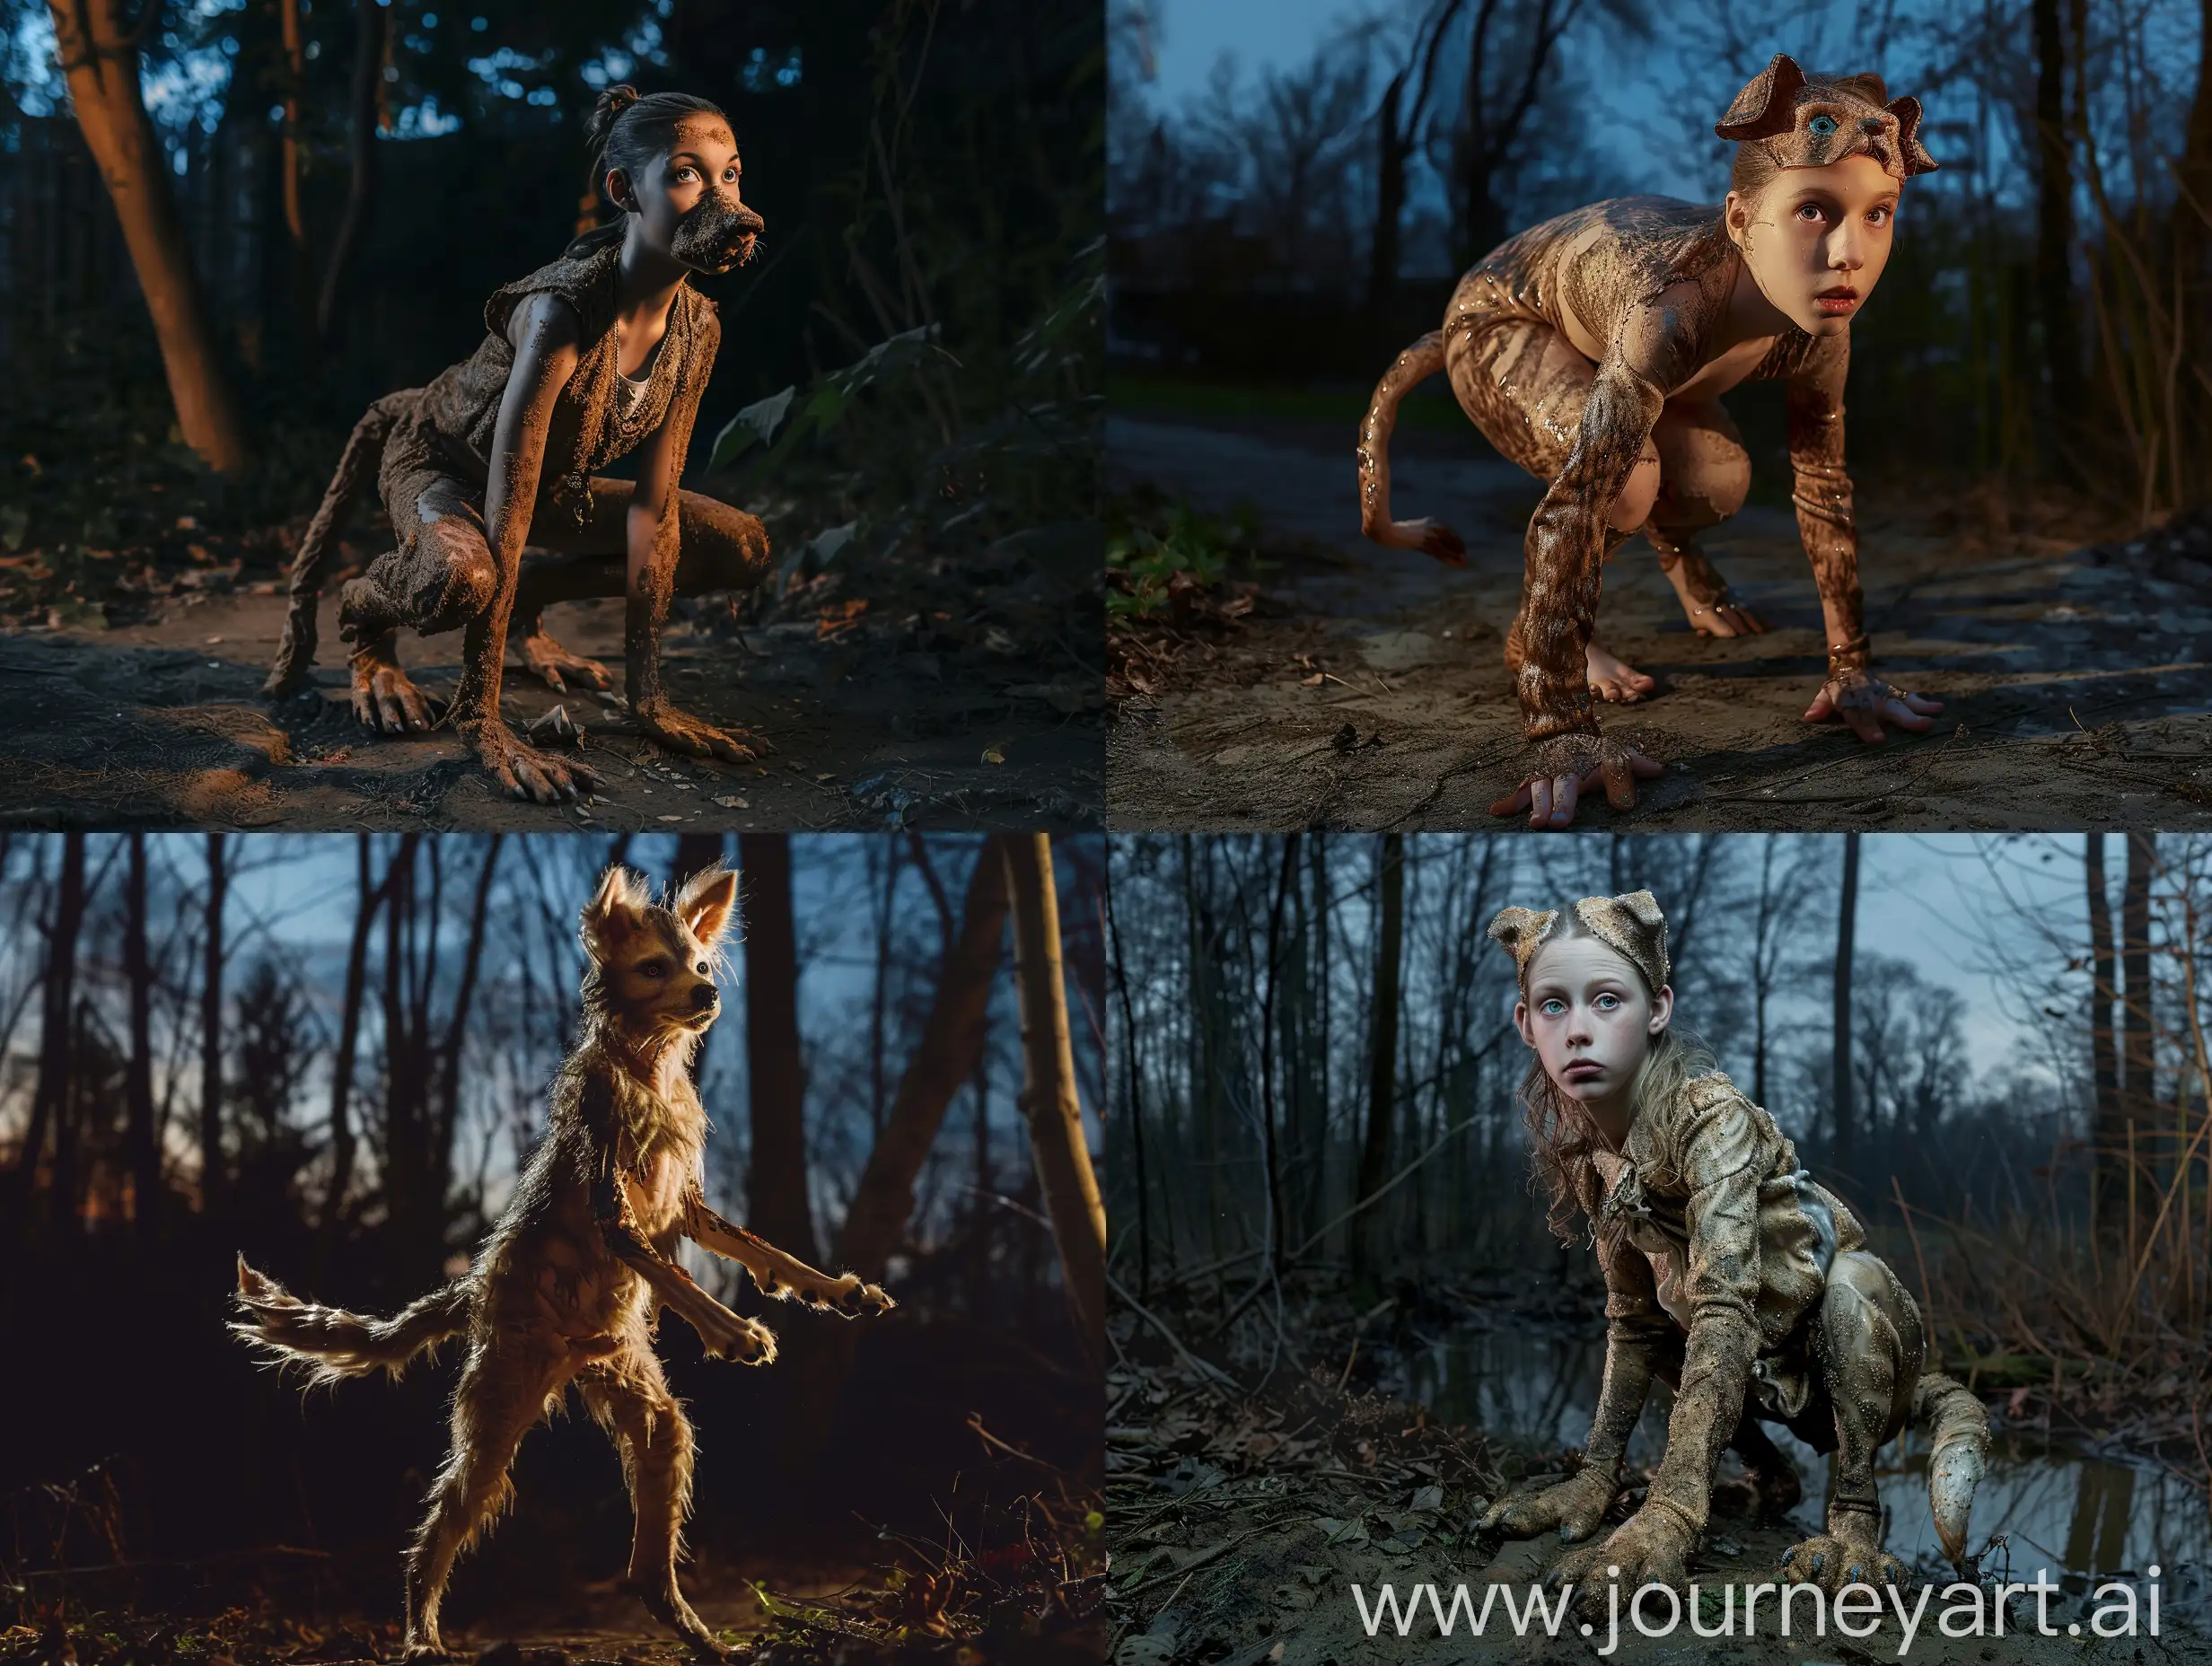 Young-Woman-Transformed-into-Dog-Standing-in-Night-Forest